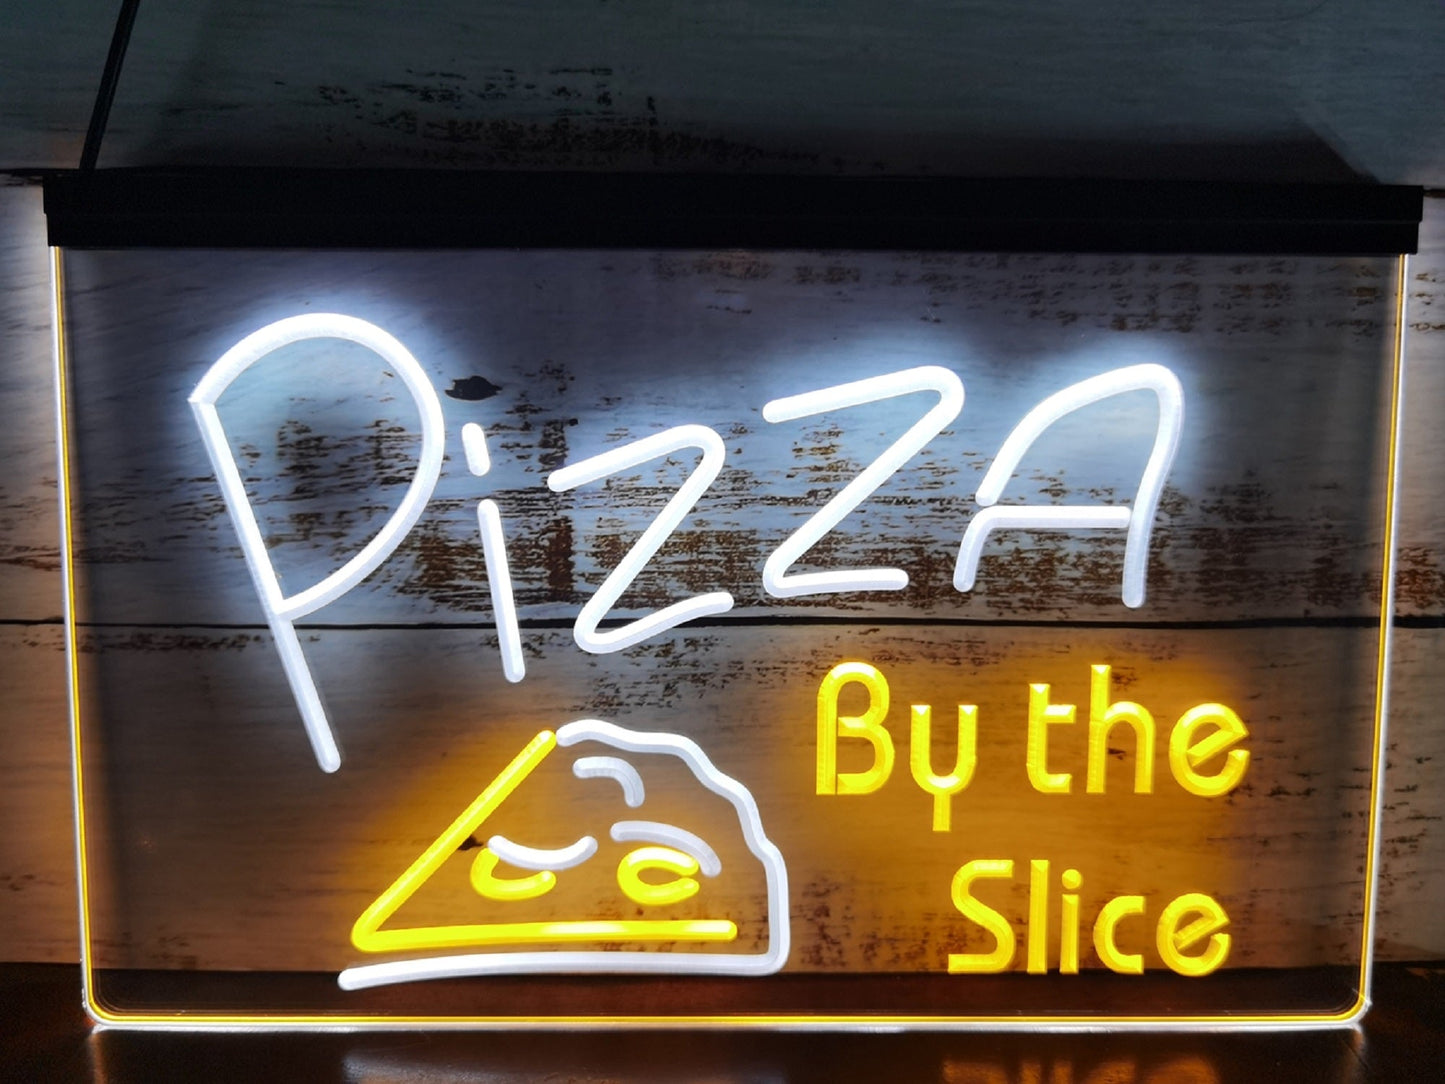 Neon Sign Dual Color Pizza by The Slice Wall Decor Pizza Restaurant Fast Food Decor